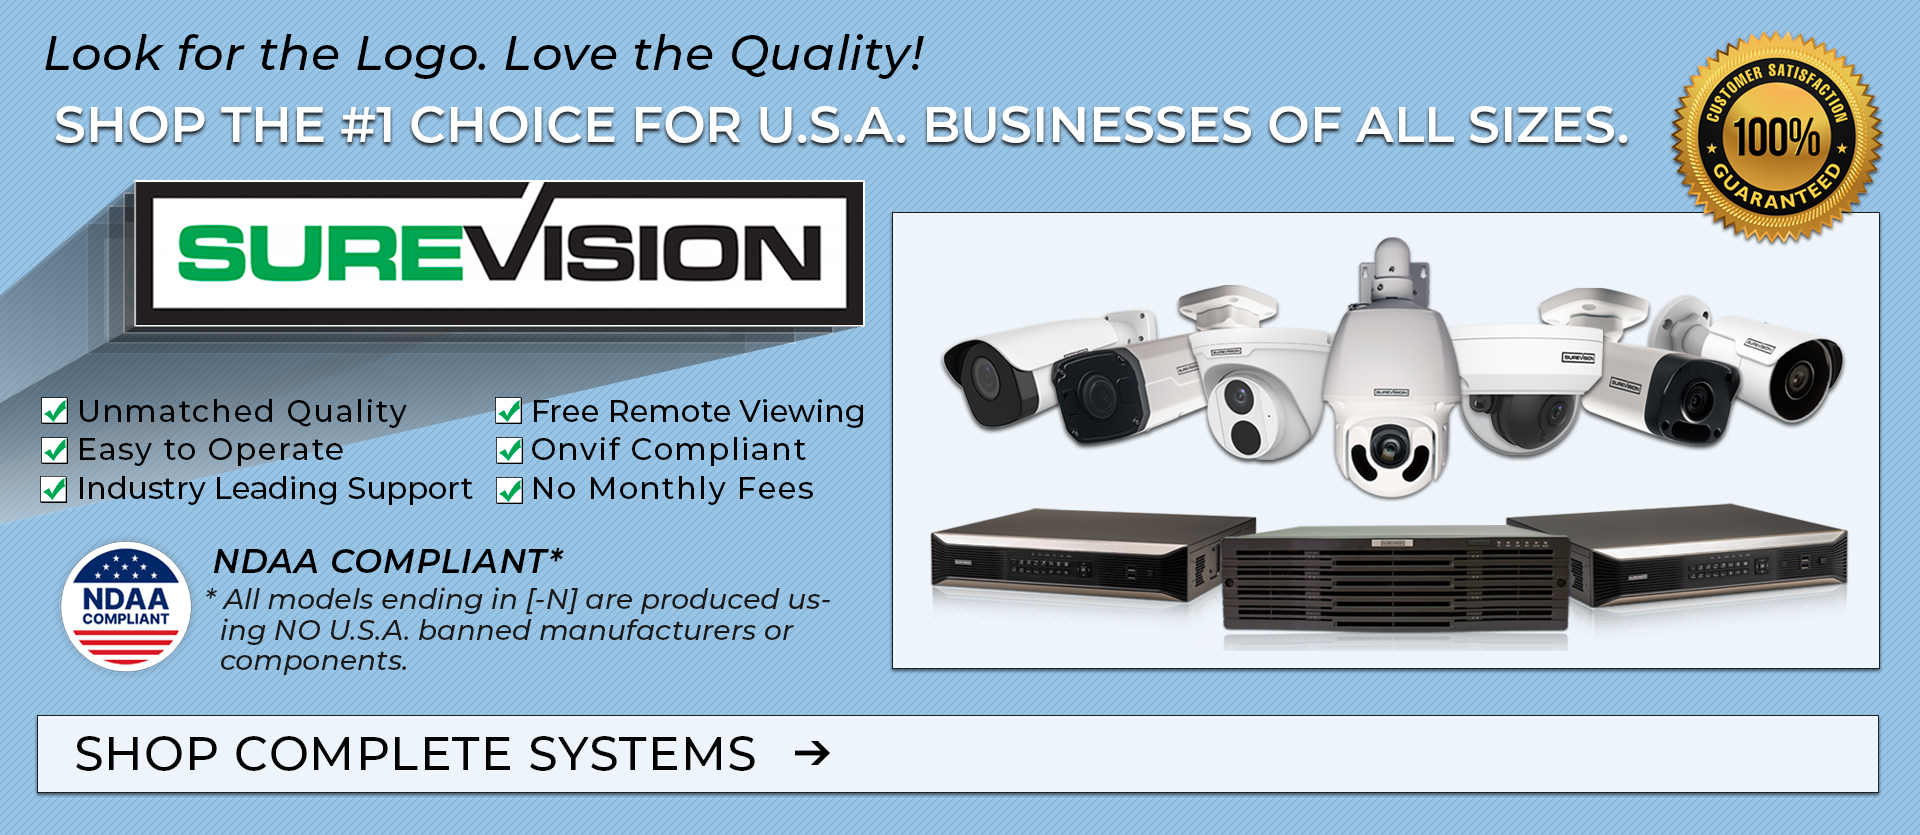 Shop The #1 Choice For USA Businesses of all Sizes